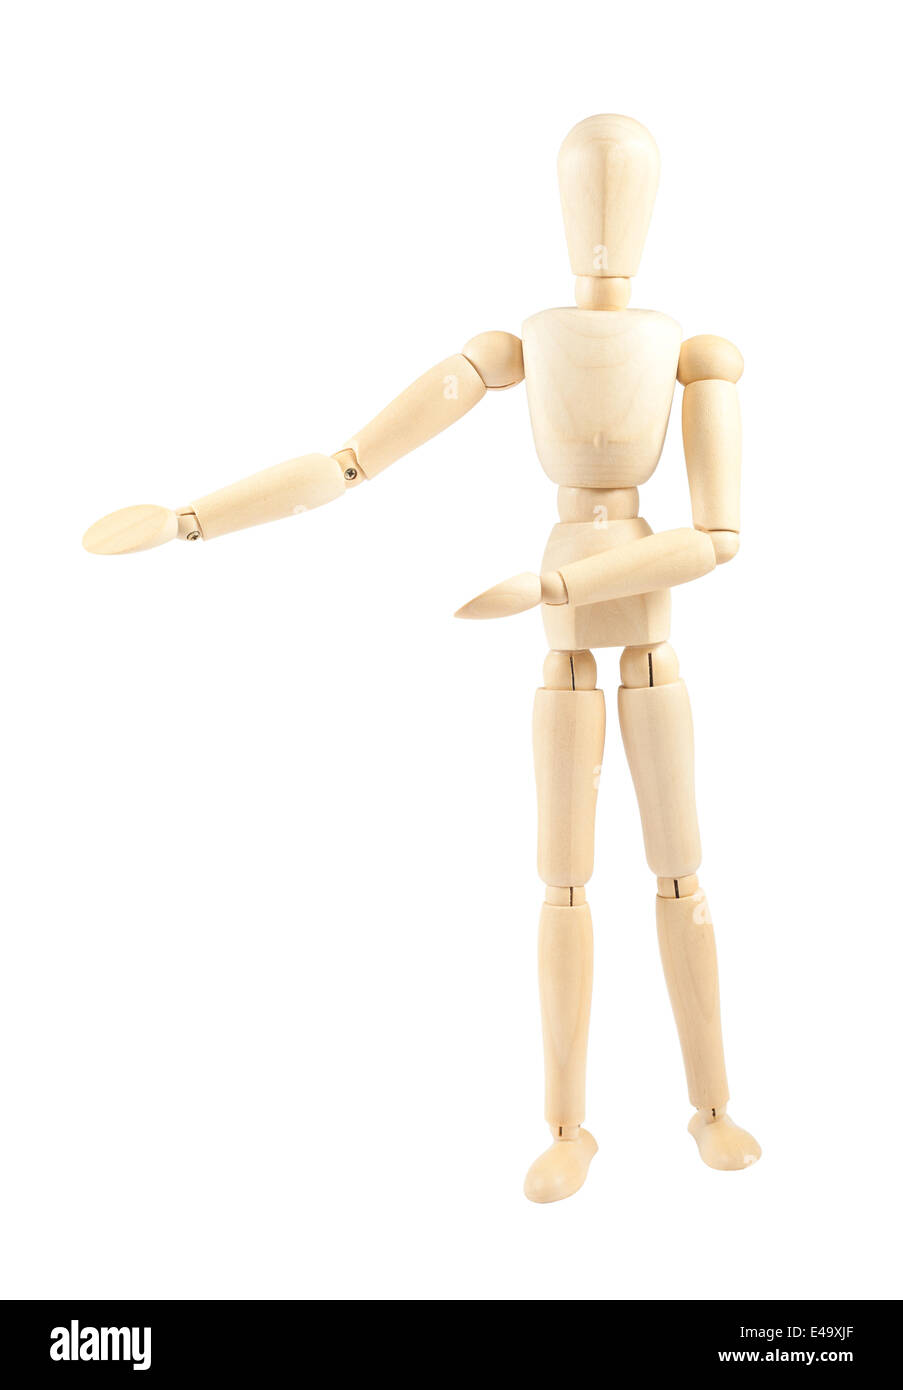 Wooden dummy showing product Stock Photo